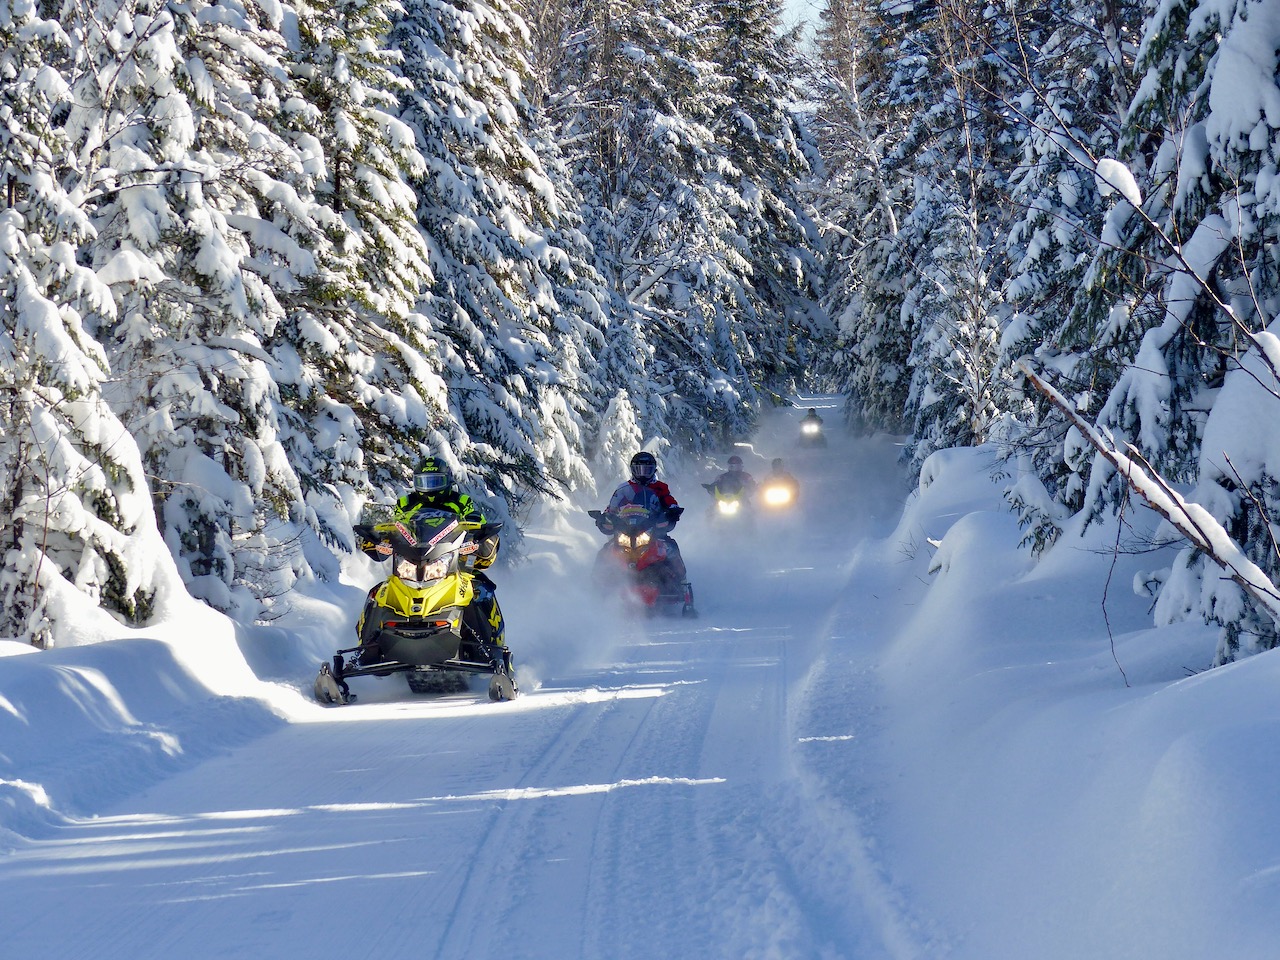 Riding a snowy trail in the Abitibi-Témiscamingue Region of Quebec.